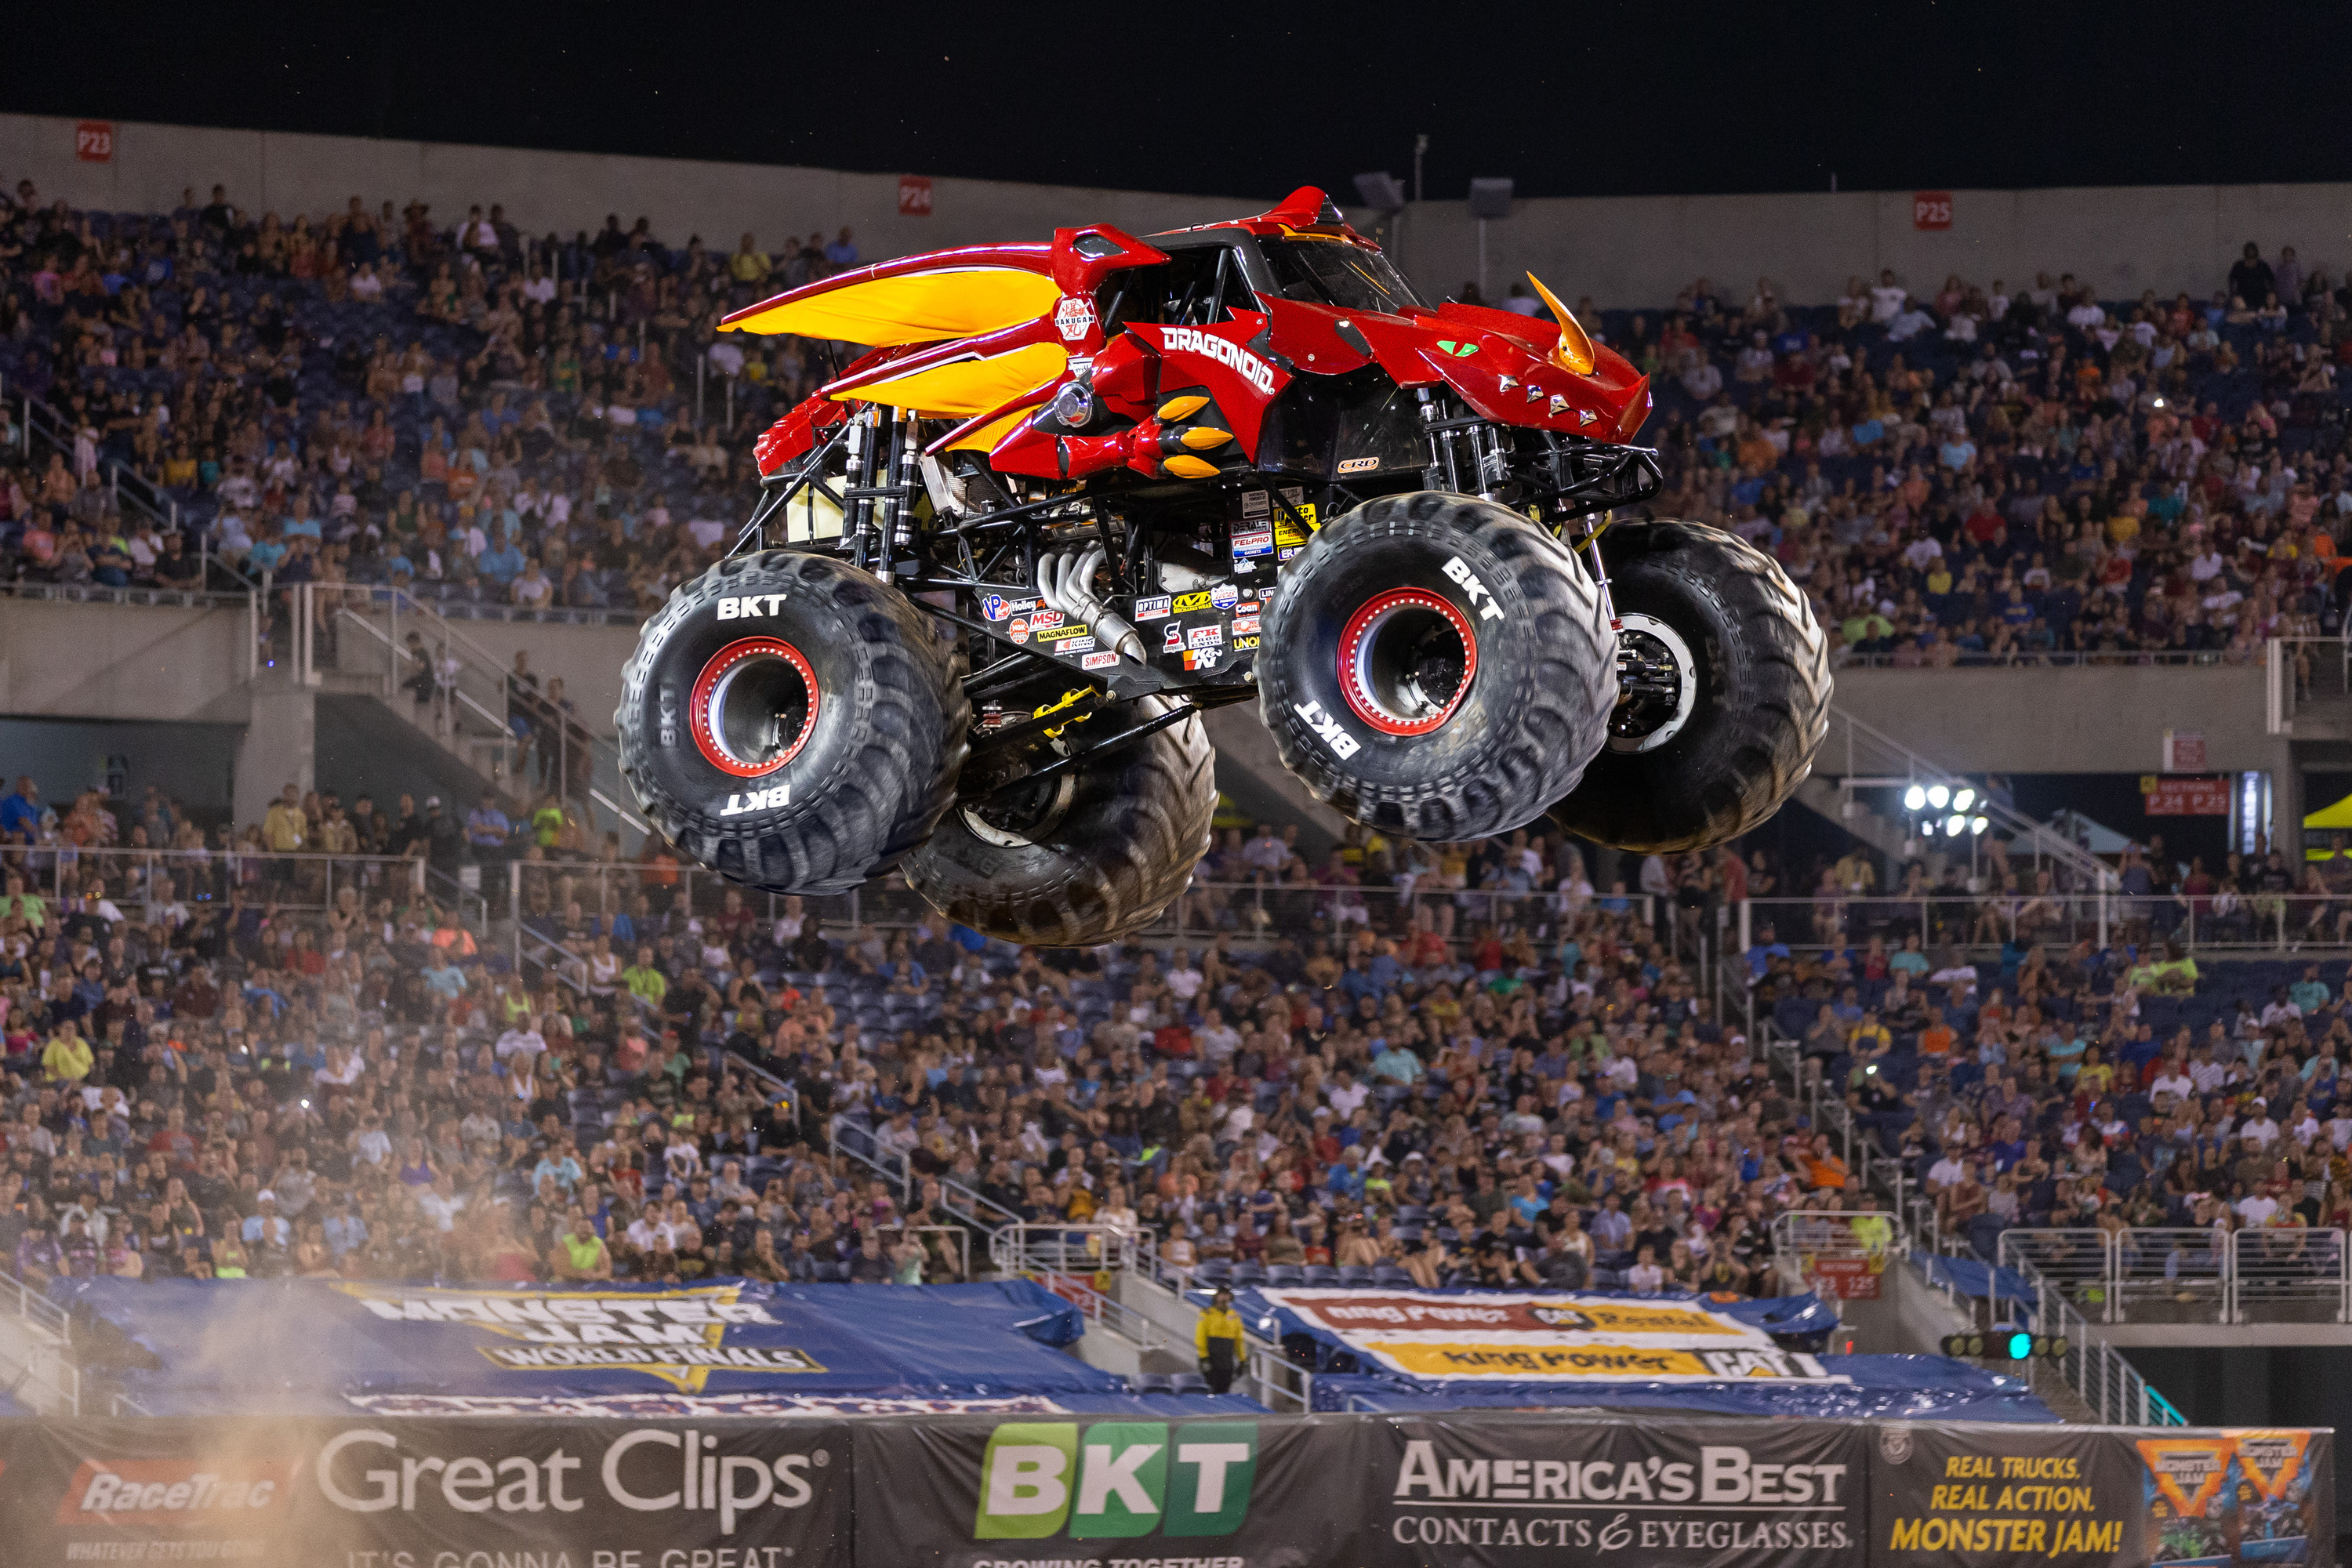 Monster Jam is coming to Sydney in October